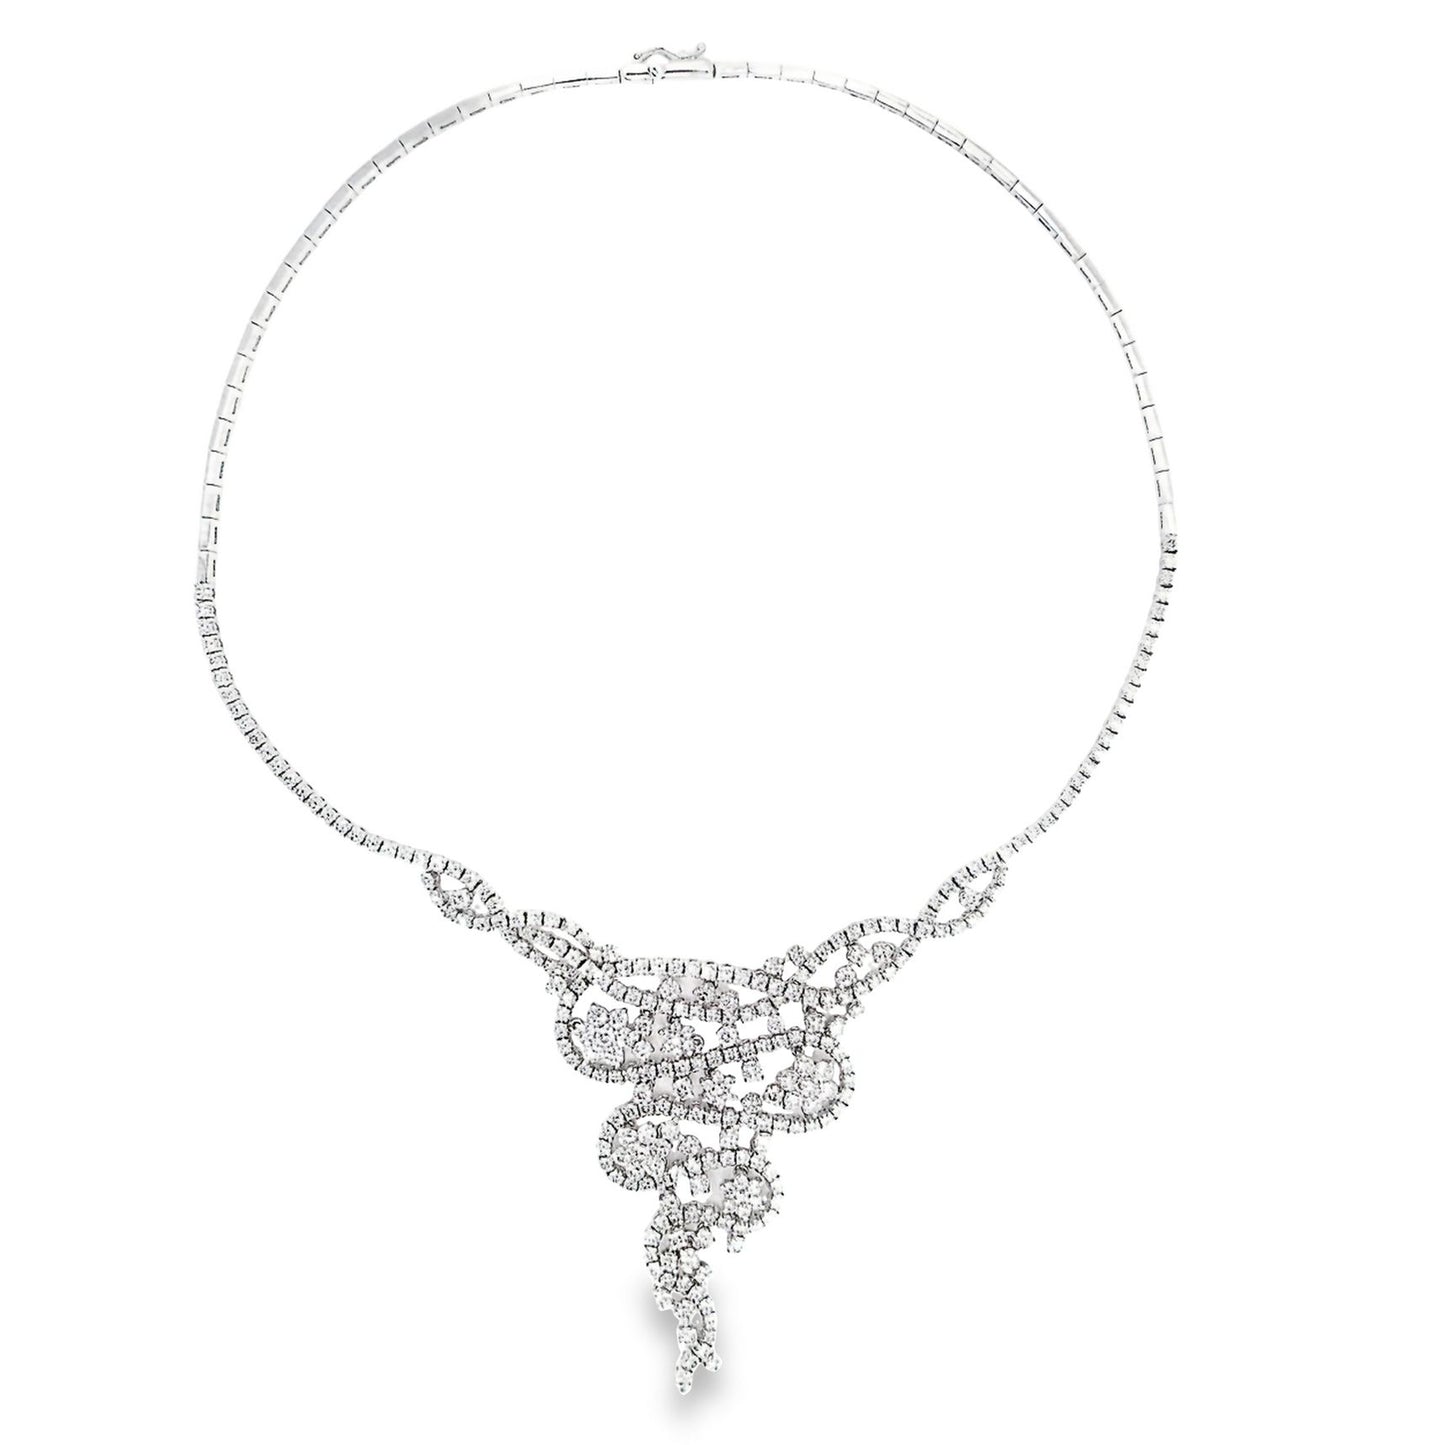 12.50ct Natural White Diamonds set in 18KT White Gold Necklace